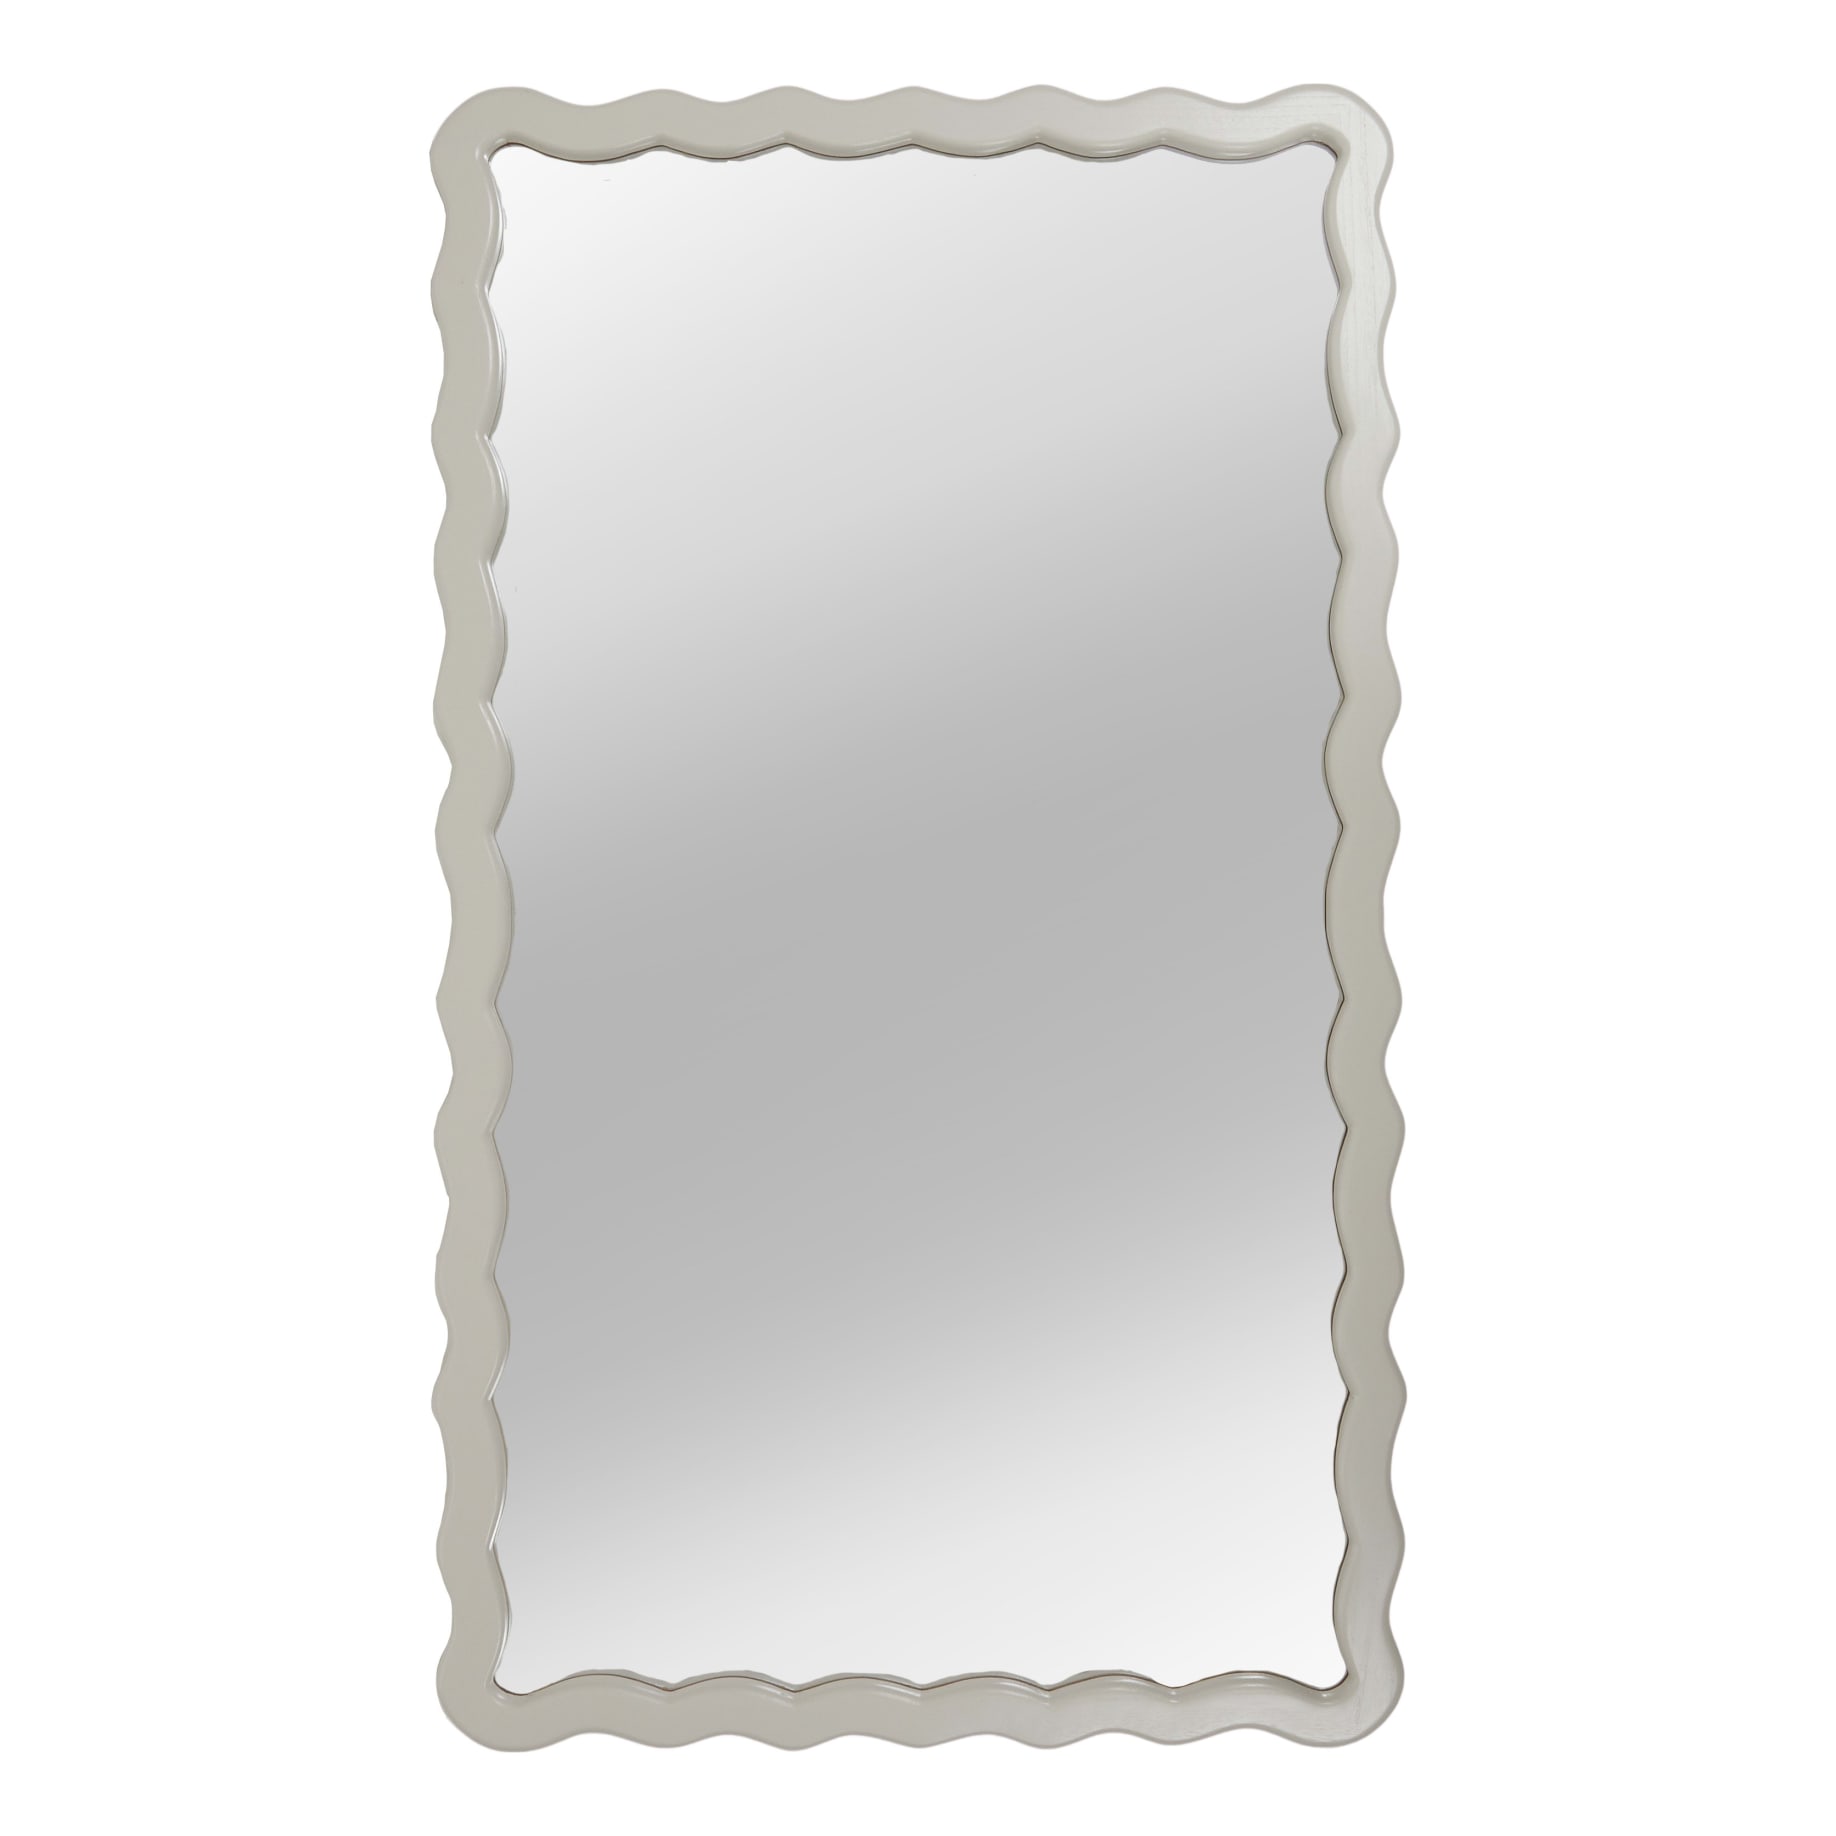 Avery Mirror 70x120cm in Taupe